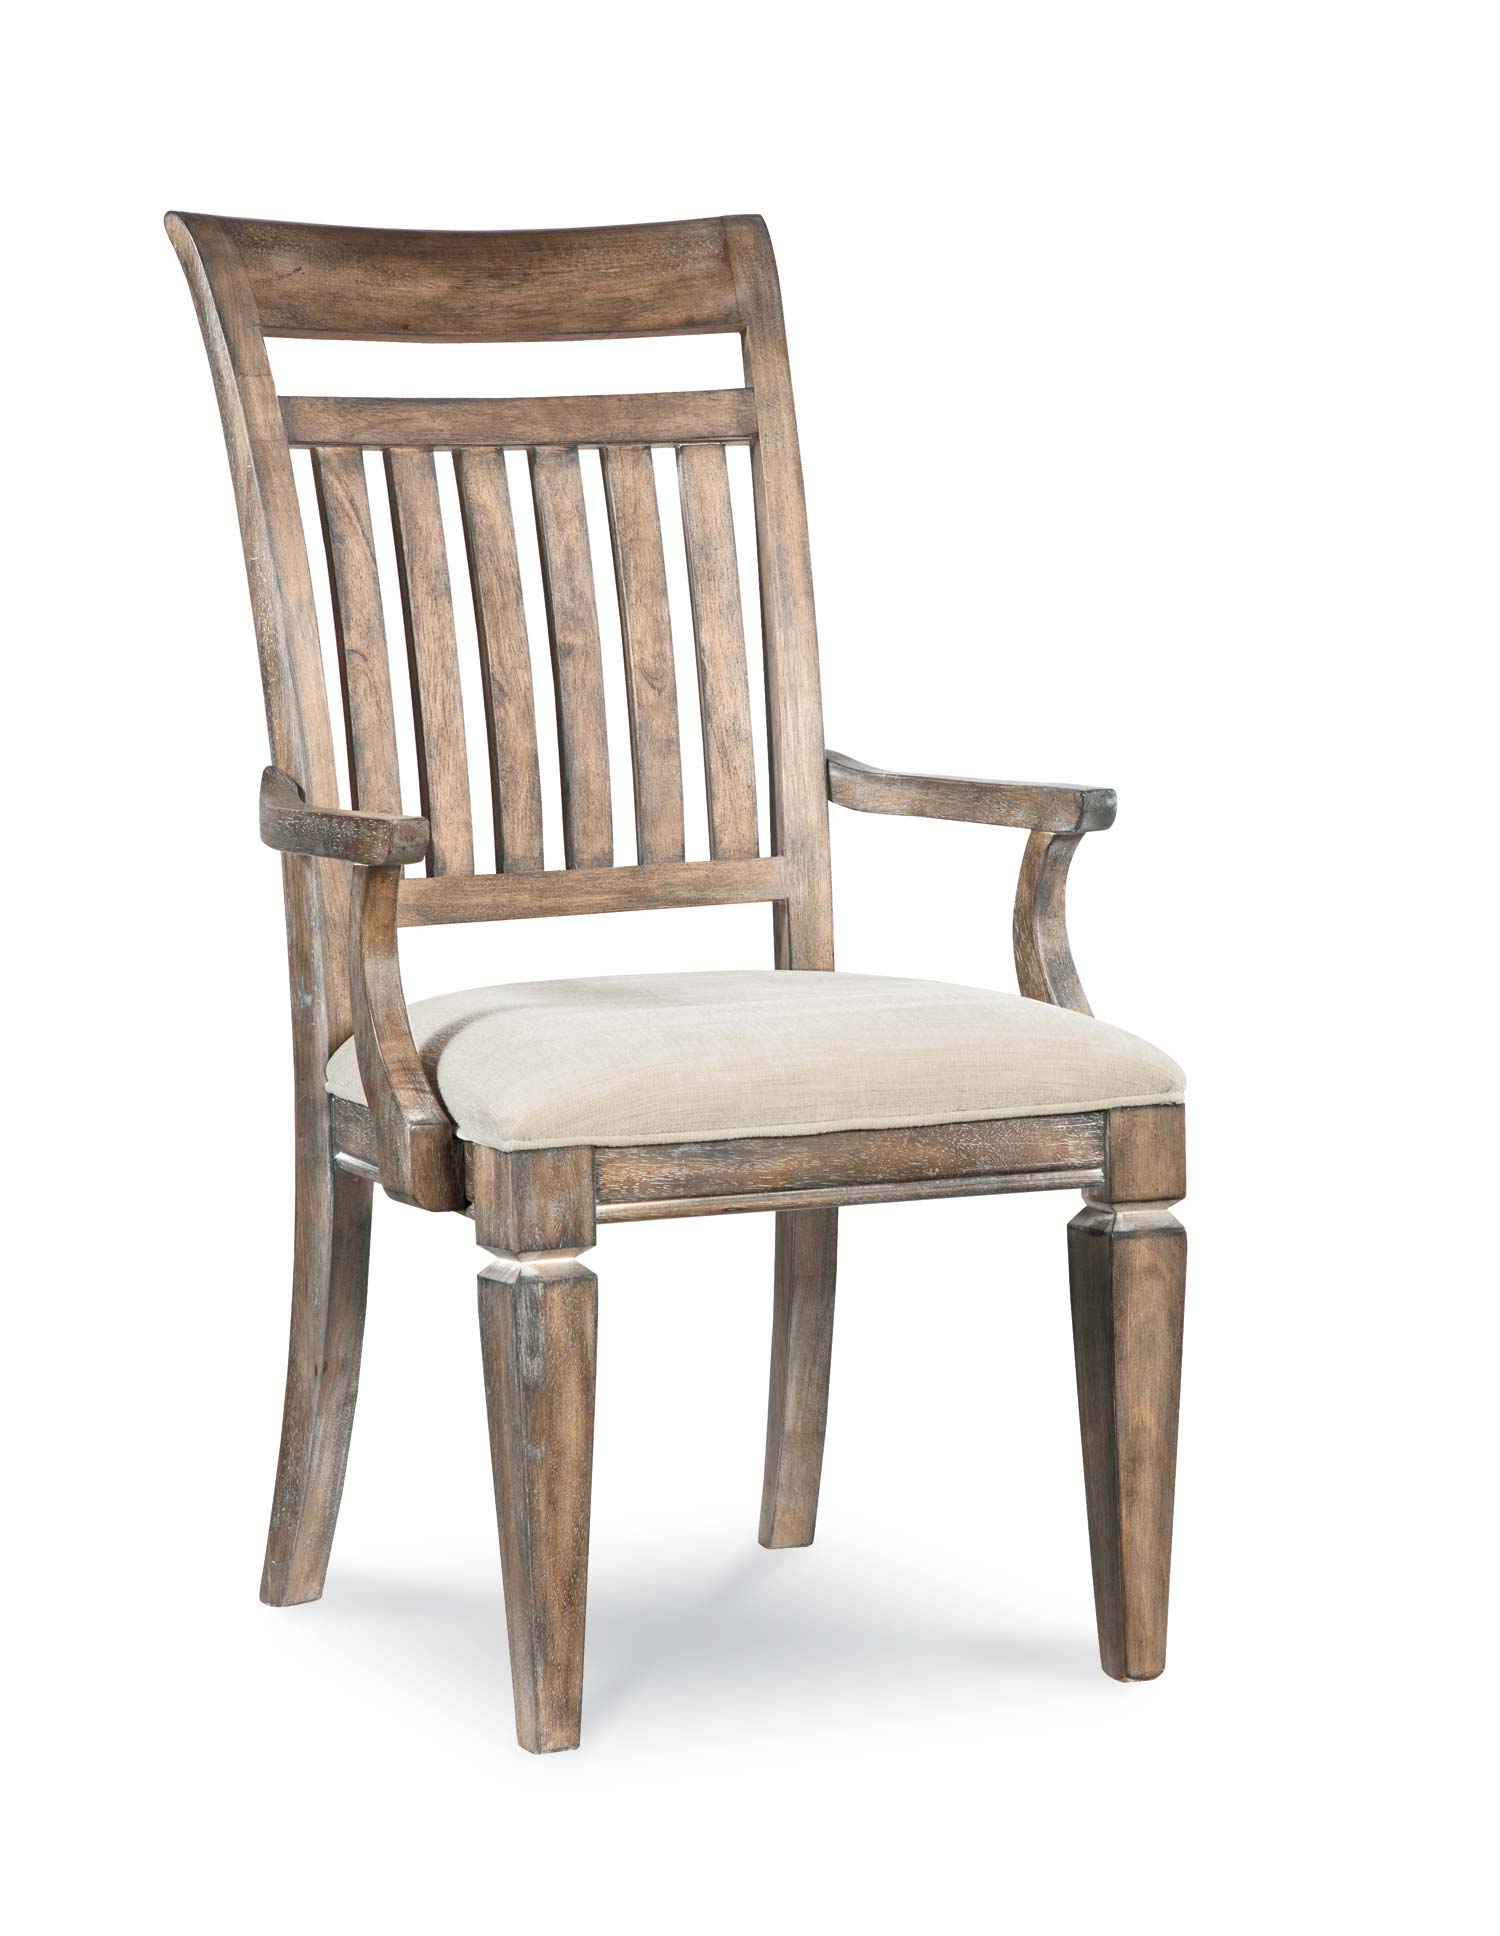 Legacy Classic Brownstone Village Slat Arm Side Chair - Aged Patina